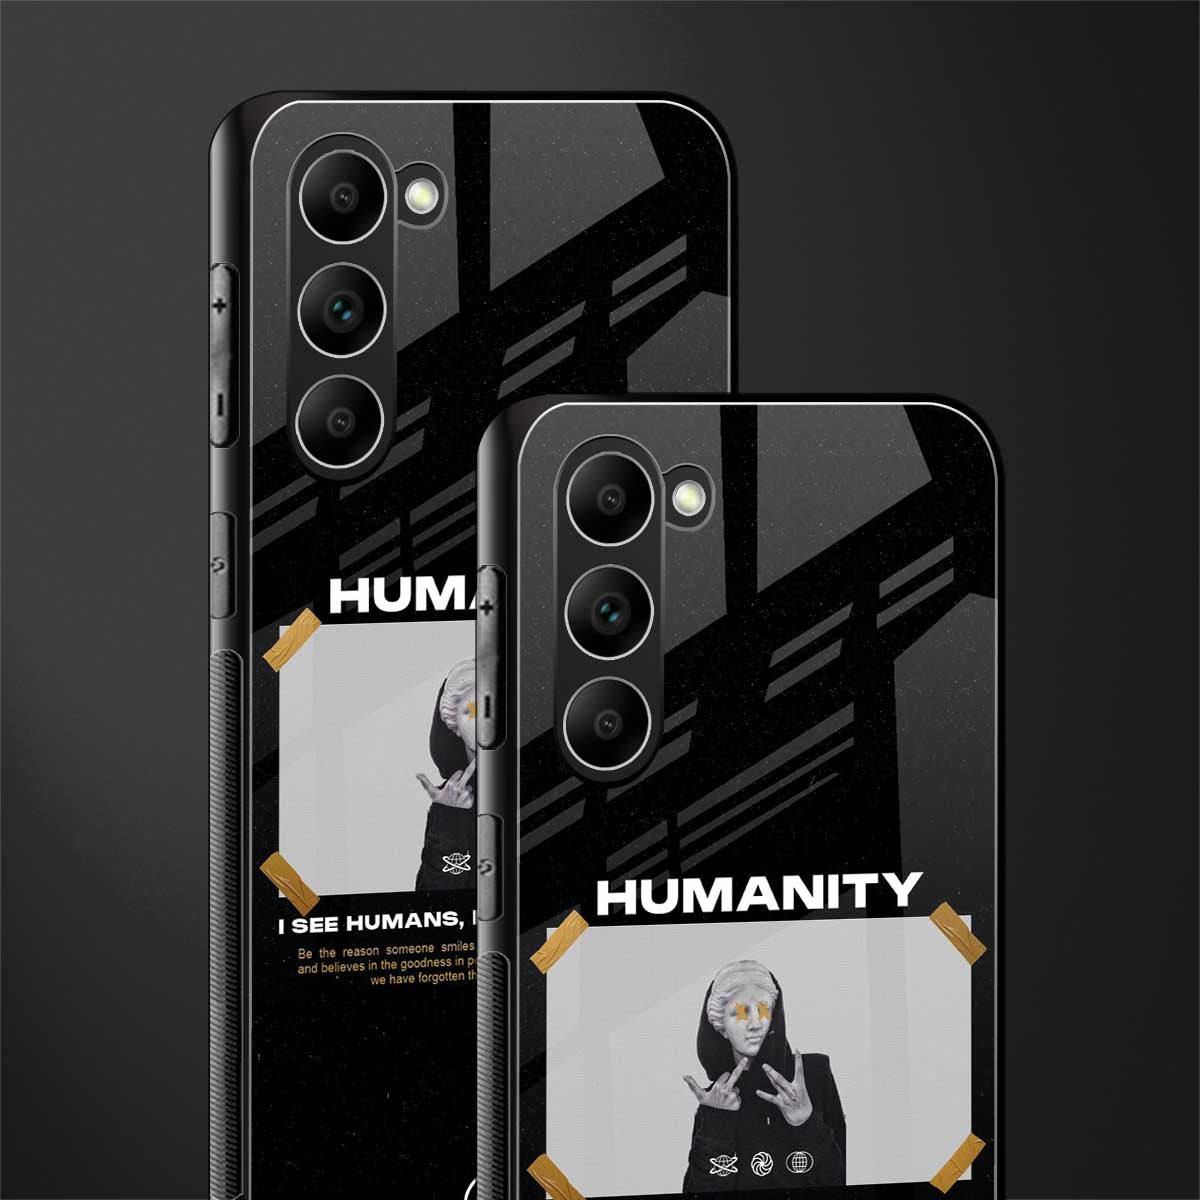 humans but no humanity glass case for phone case | glass case for samsung galaxy s23